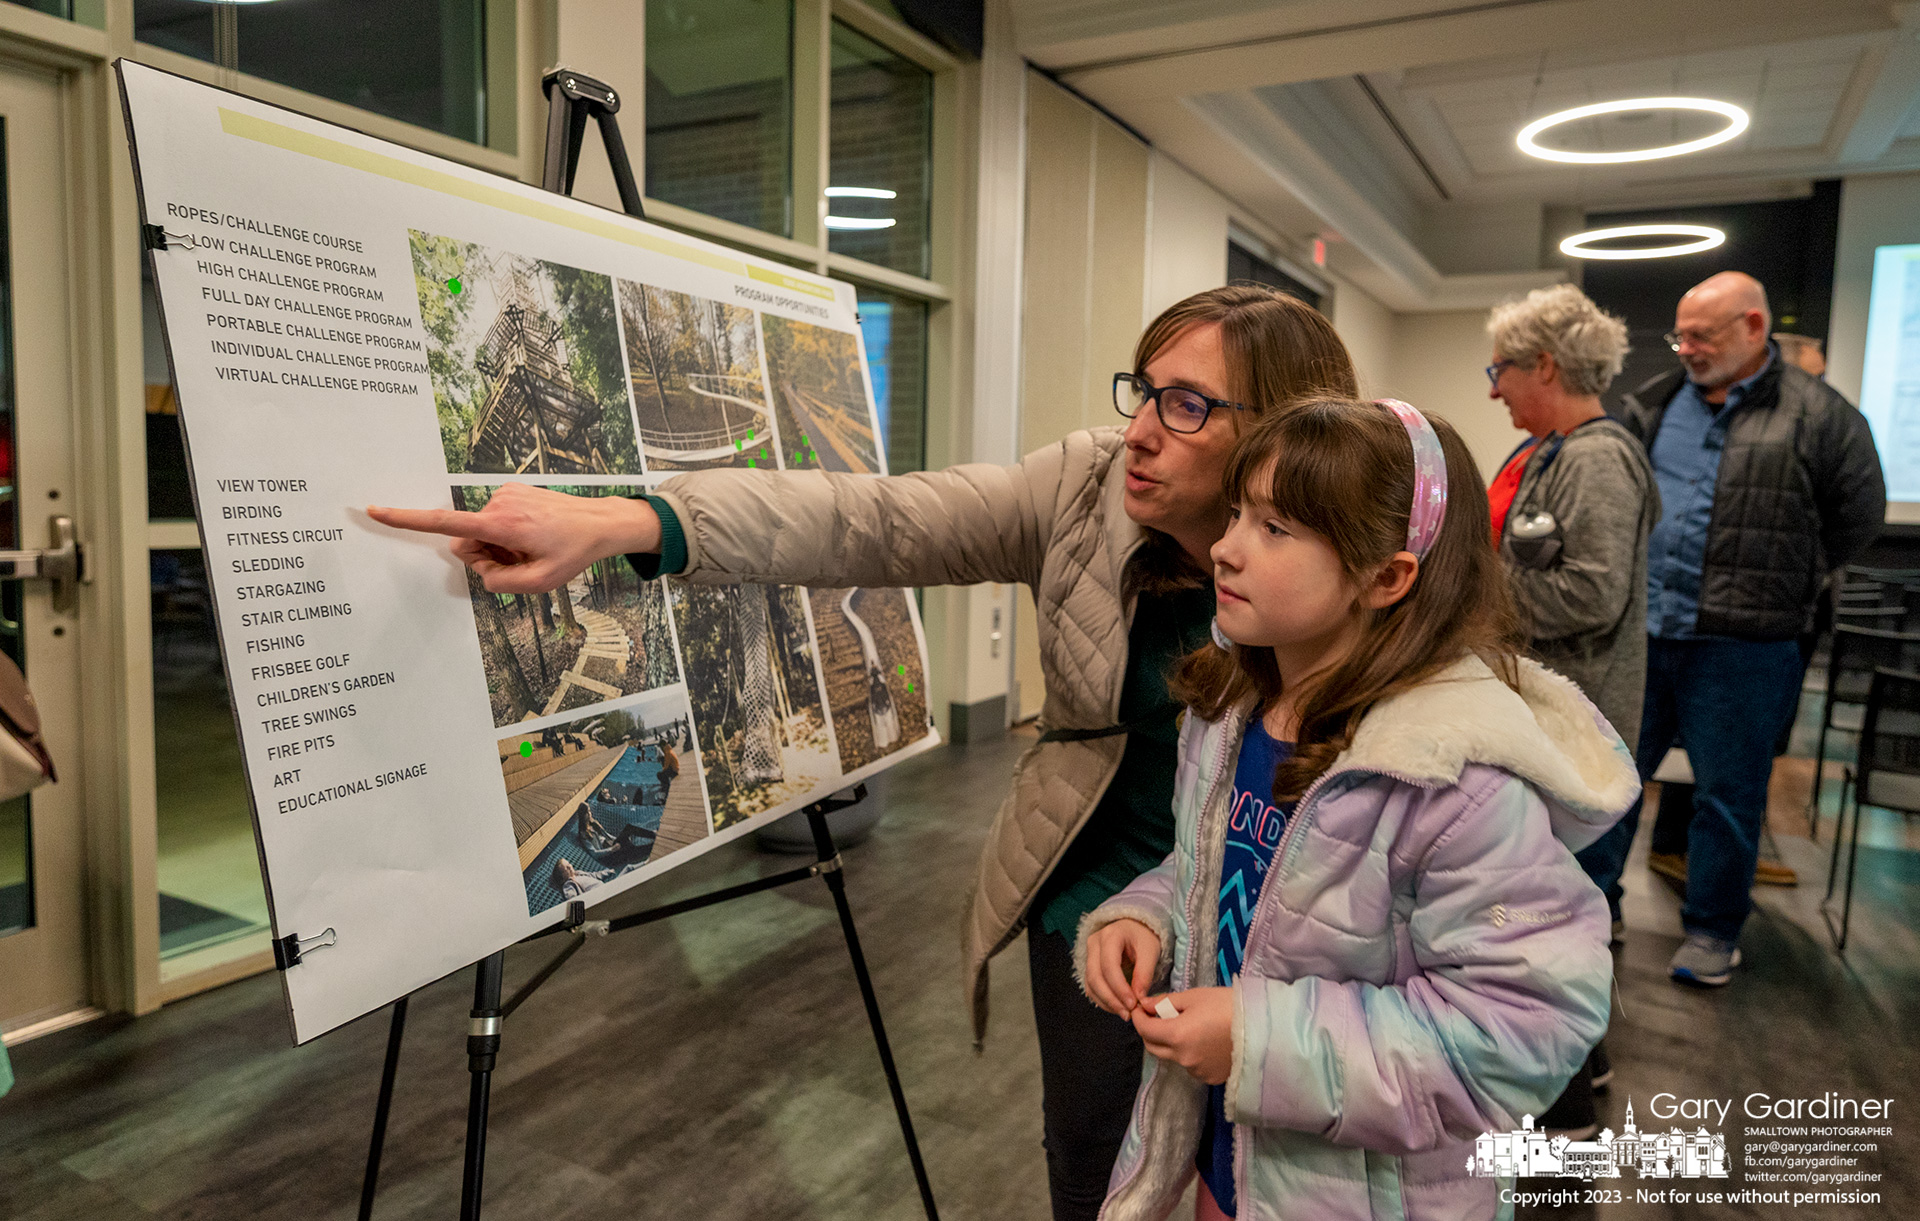 A mother and daughter select ideas for Westerville's Edge Adventure Park during the first public planning meeting about building the new park in a deep ravine along Alum Creek. My Final Photo for January 12, 2023.